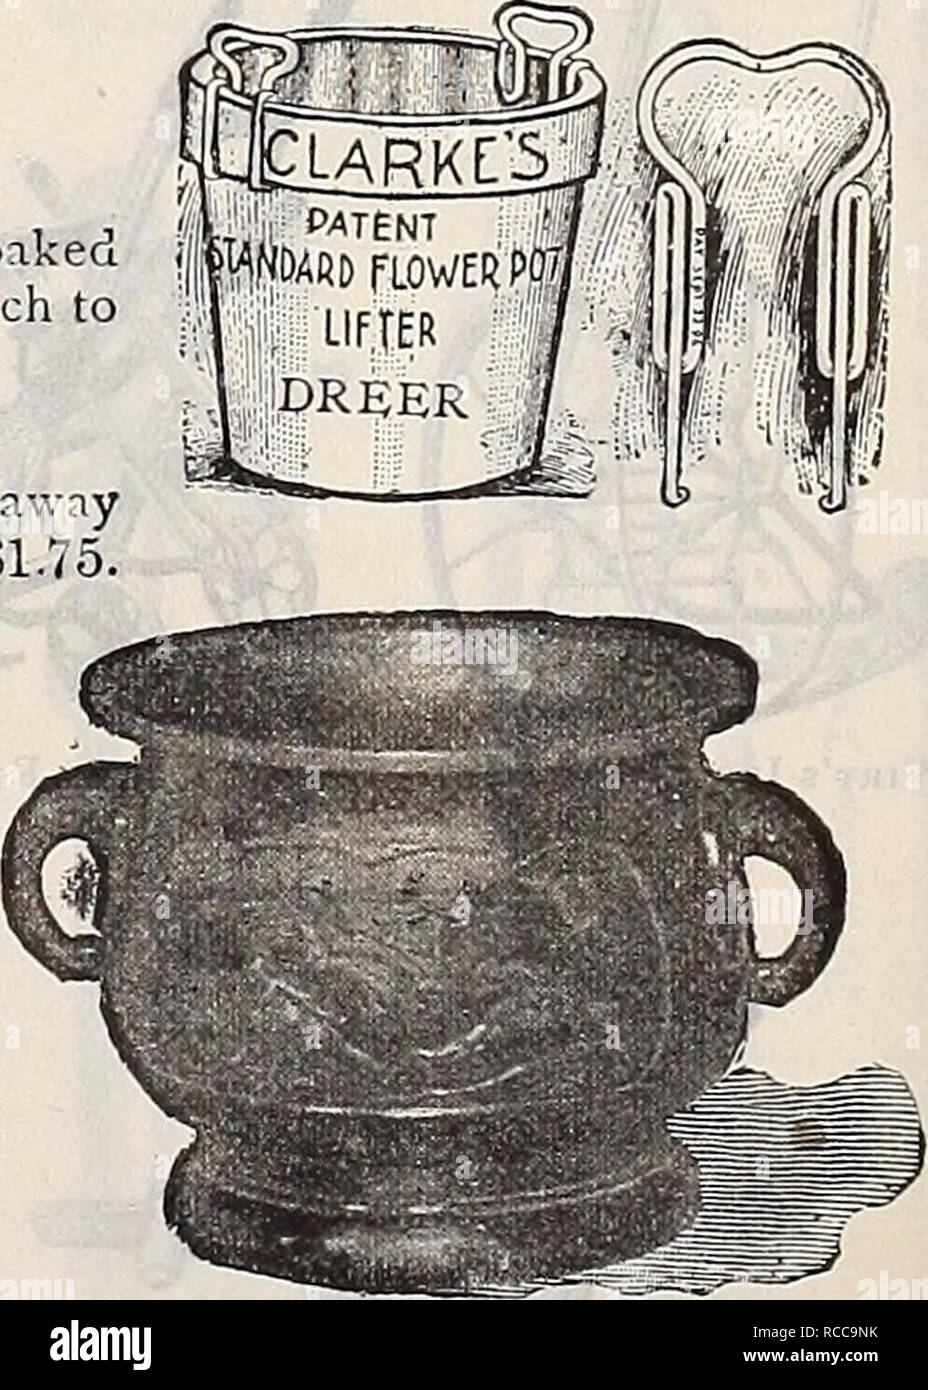 . Dreer's 1900 autumn catalogue of bulbs, plants, seeds, etc. Bulbs (Plants) Catalogs; Flowers Seeds Catalogs; Gardening Equipment and supplies Catalogs; Nurseries (Horticulture) Catalogs; Fruit Seeds Catalogs. OREERS PLANTSrANP .15. 18 .24 .30. .36. .$0 60. 70. 90 . 1 20. 1 45 $0 75 .§1 40 85 1 55 . 1 10 1 85 . 1 40 2 15 . 1 60 2 30 Wood Plant Stand. FEOWER POT EIFTER. This ingenious pot lifter is a safeguard against broken Jardinieres and also water-soaked plants, as they can be easily lifted from the Jardiniere with safety. Sizes to fit from 6-inch to 12-inch pots. Price, 20 cts. per pair.  Stock Photo